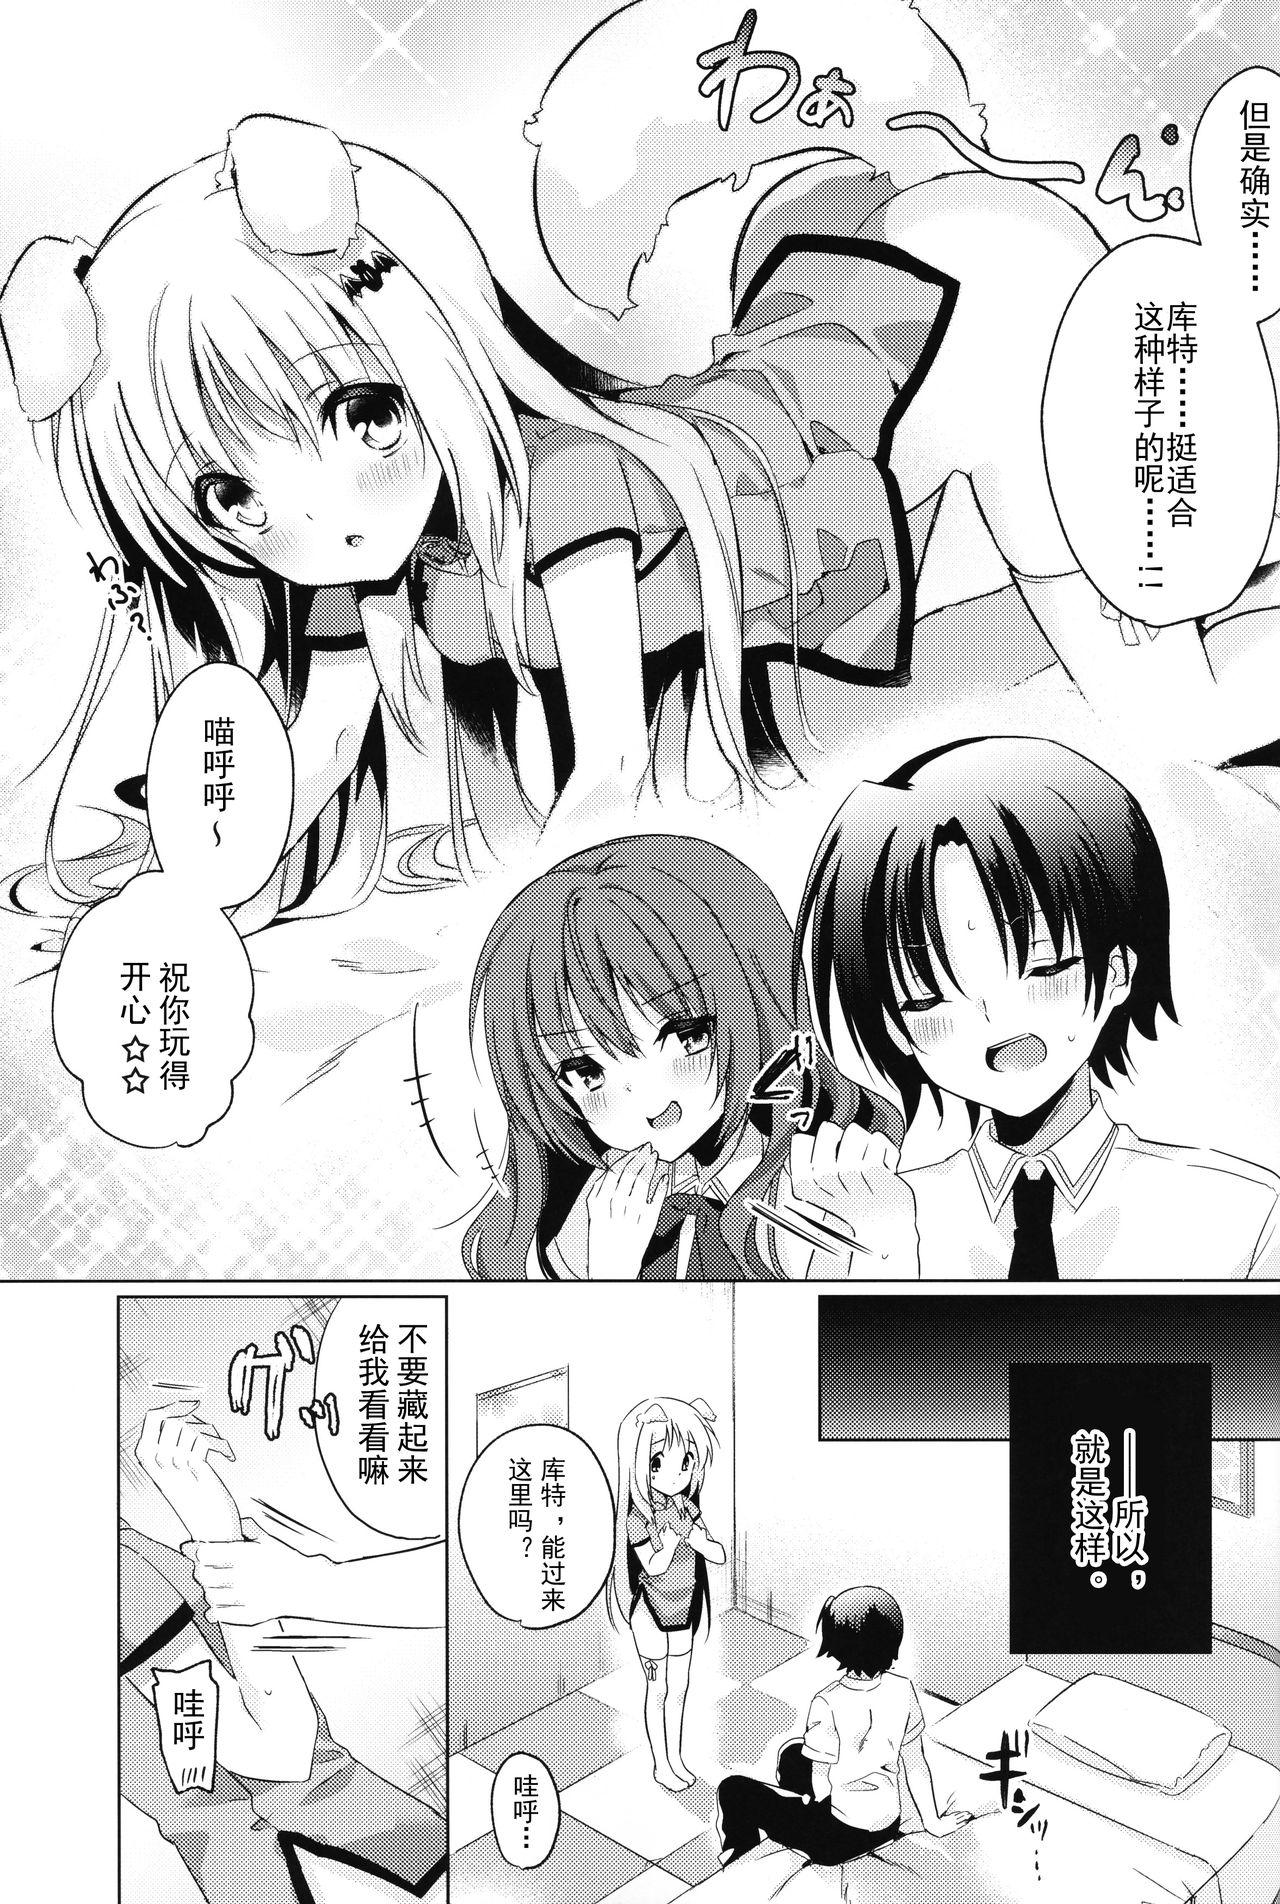 Chibola Kud After4 - Little busters Interview - Page 7